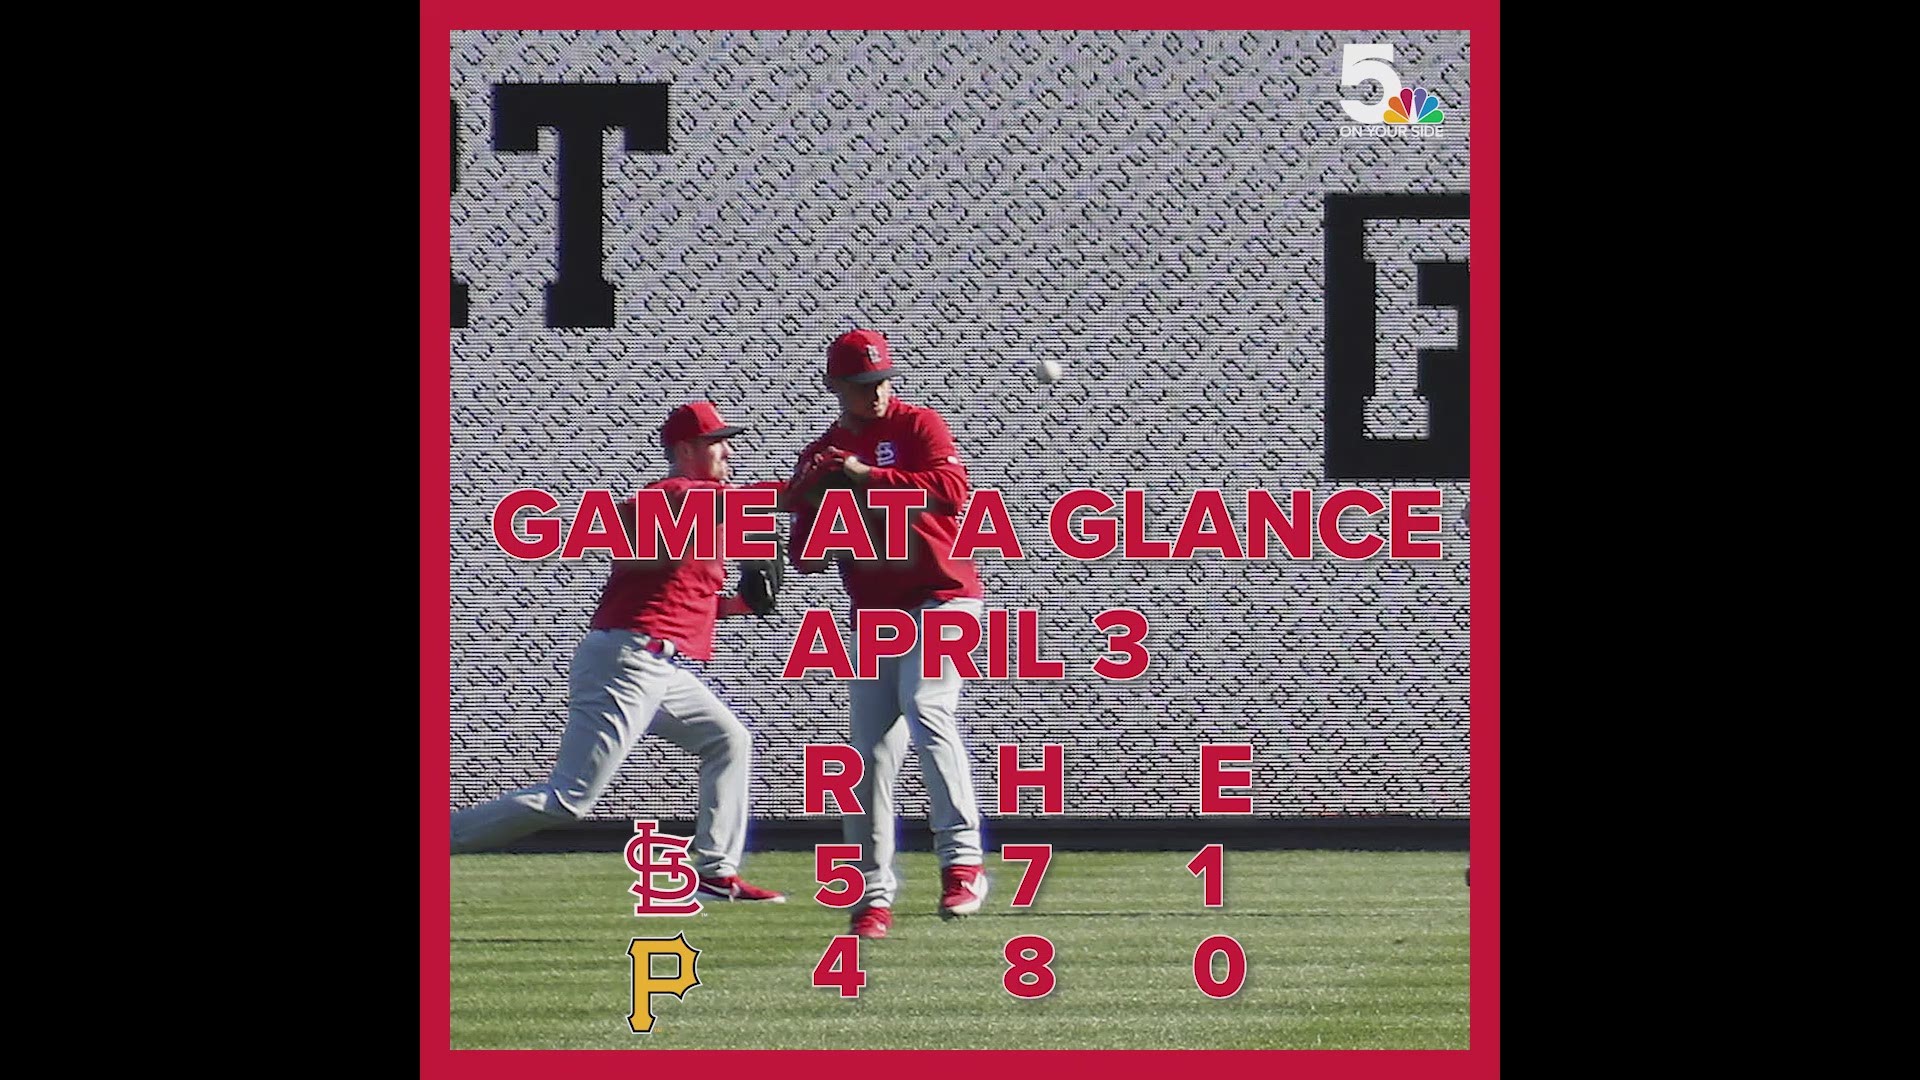 The bullpen made it interesting, but the Cardinals were able to squeak out the late victory in Pittsburgh thanks to some late power from DeJong and Bader.